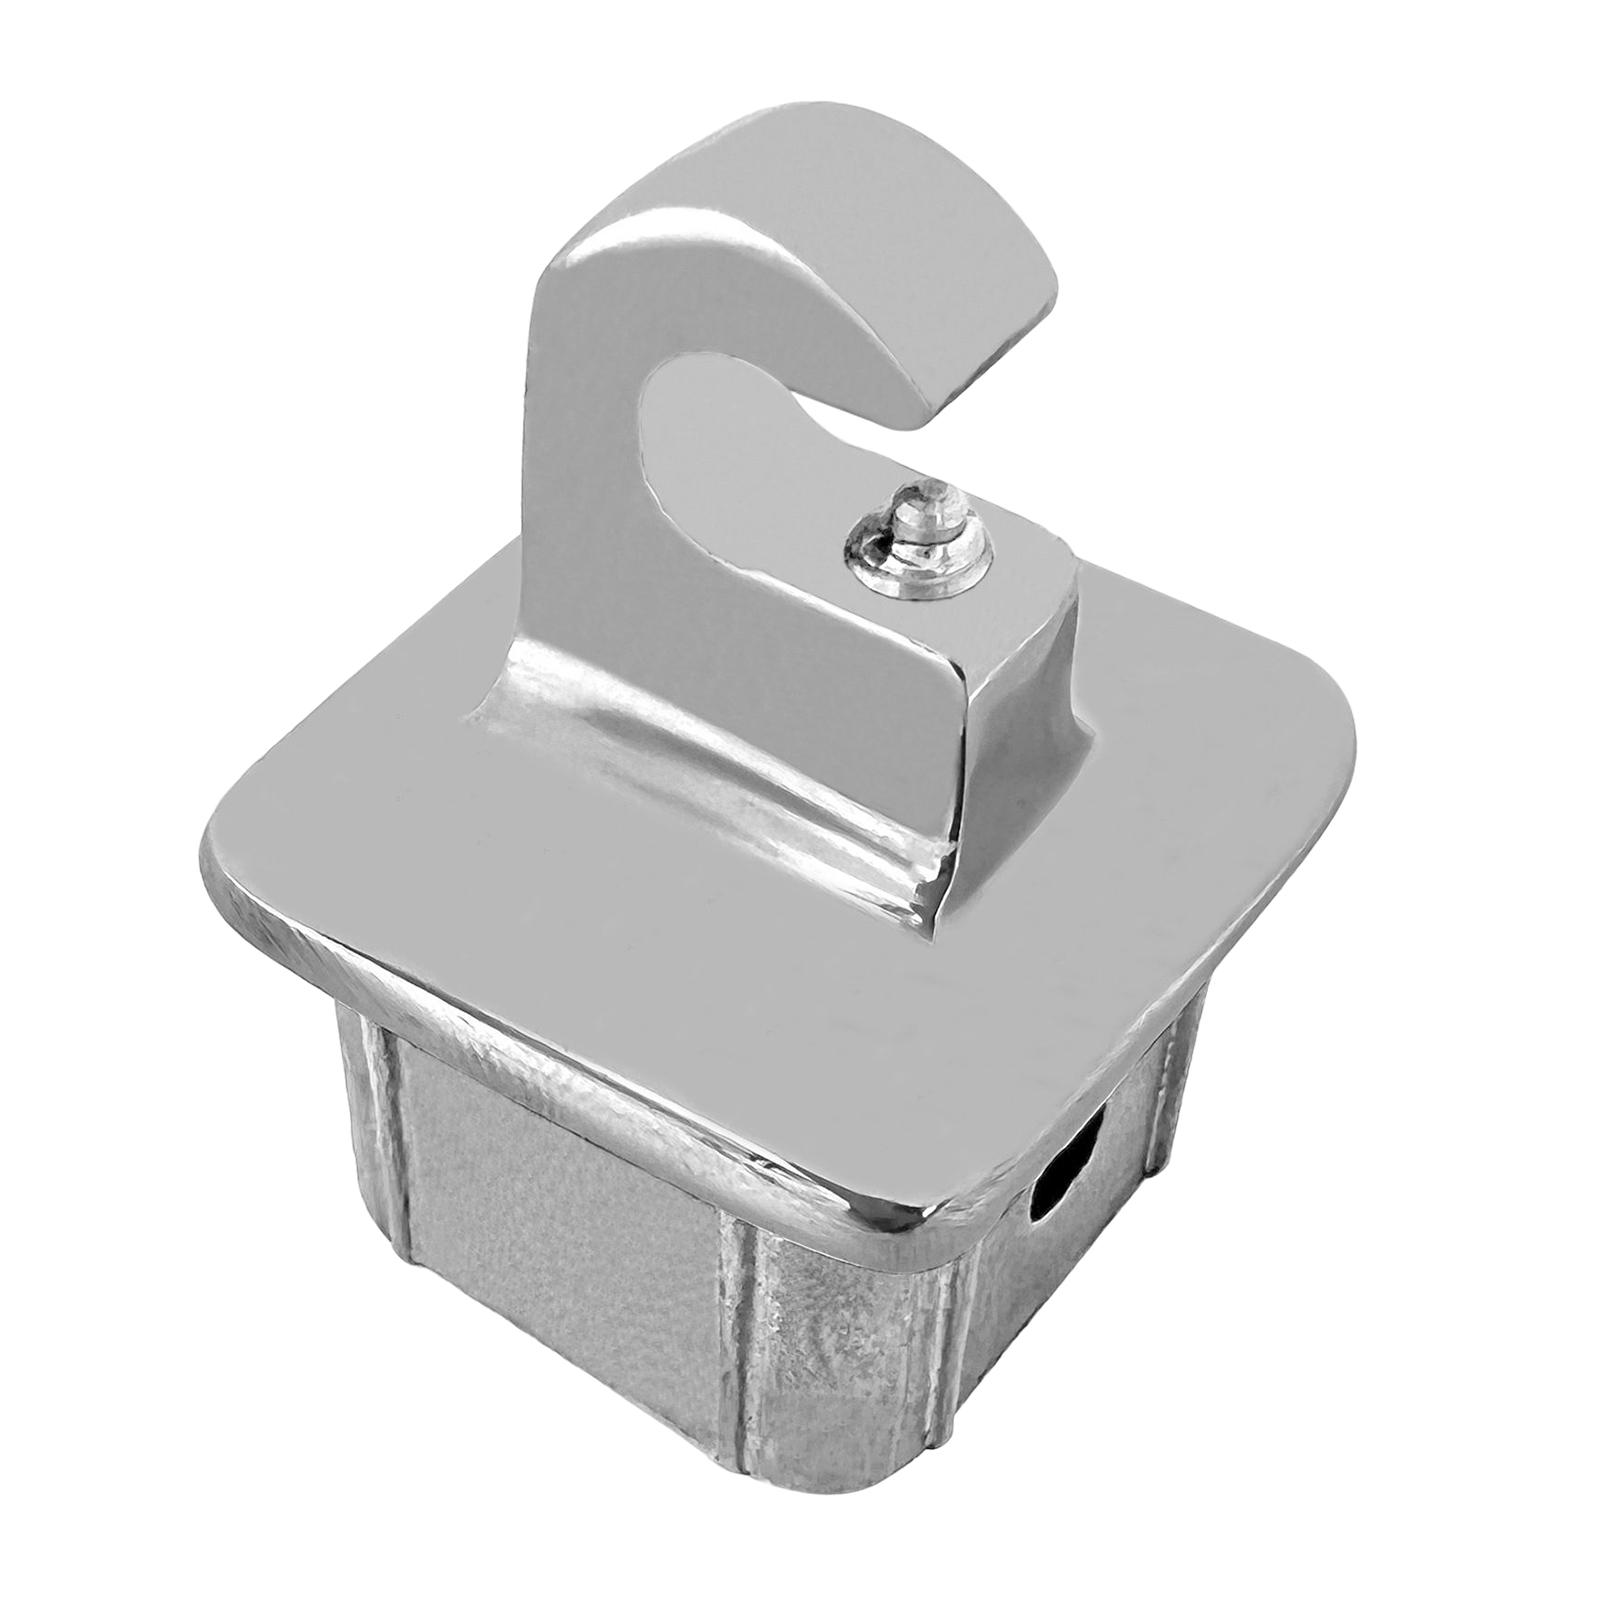 Square Internal Eye End Stainless Steel for Boat Bimini Hardware Accessories